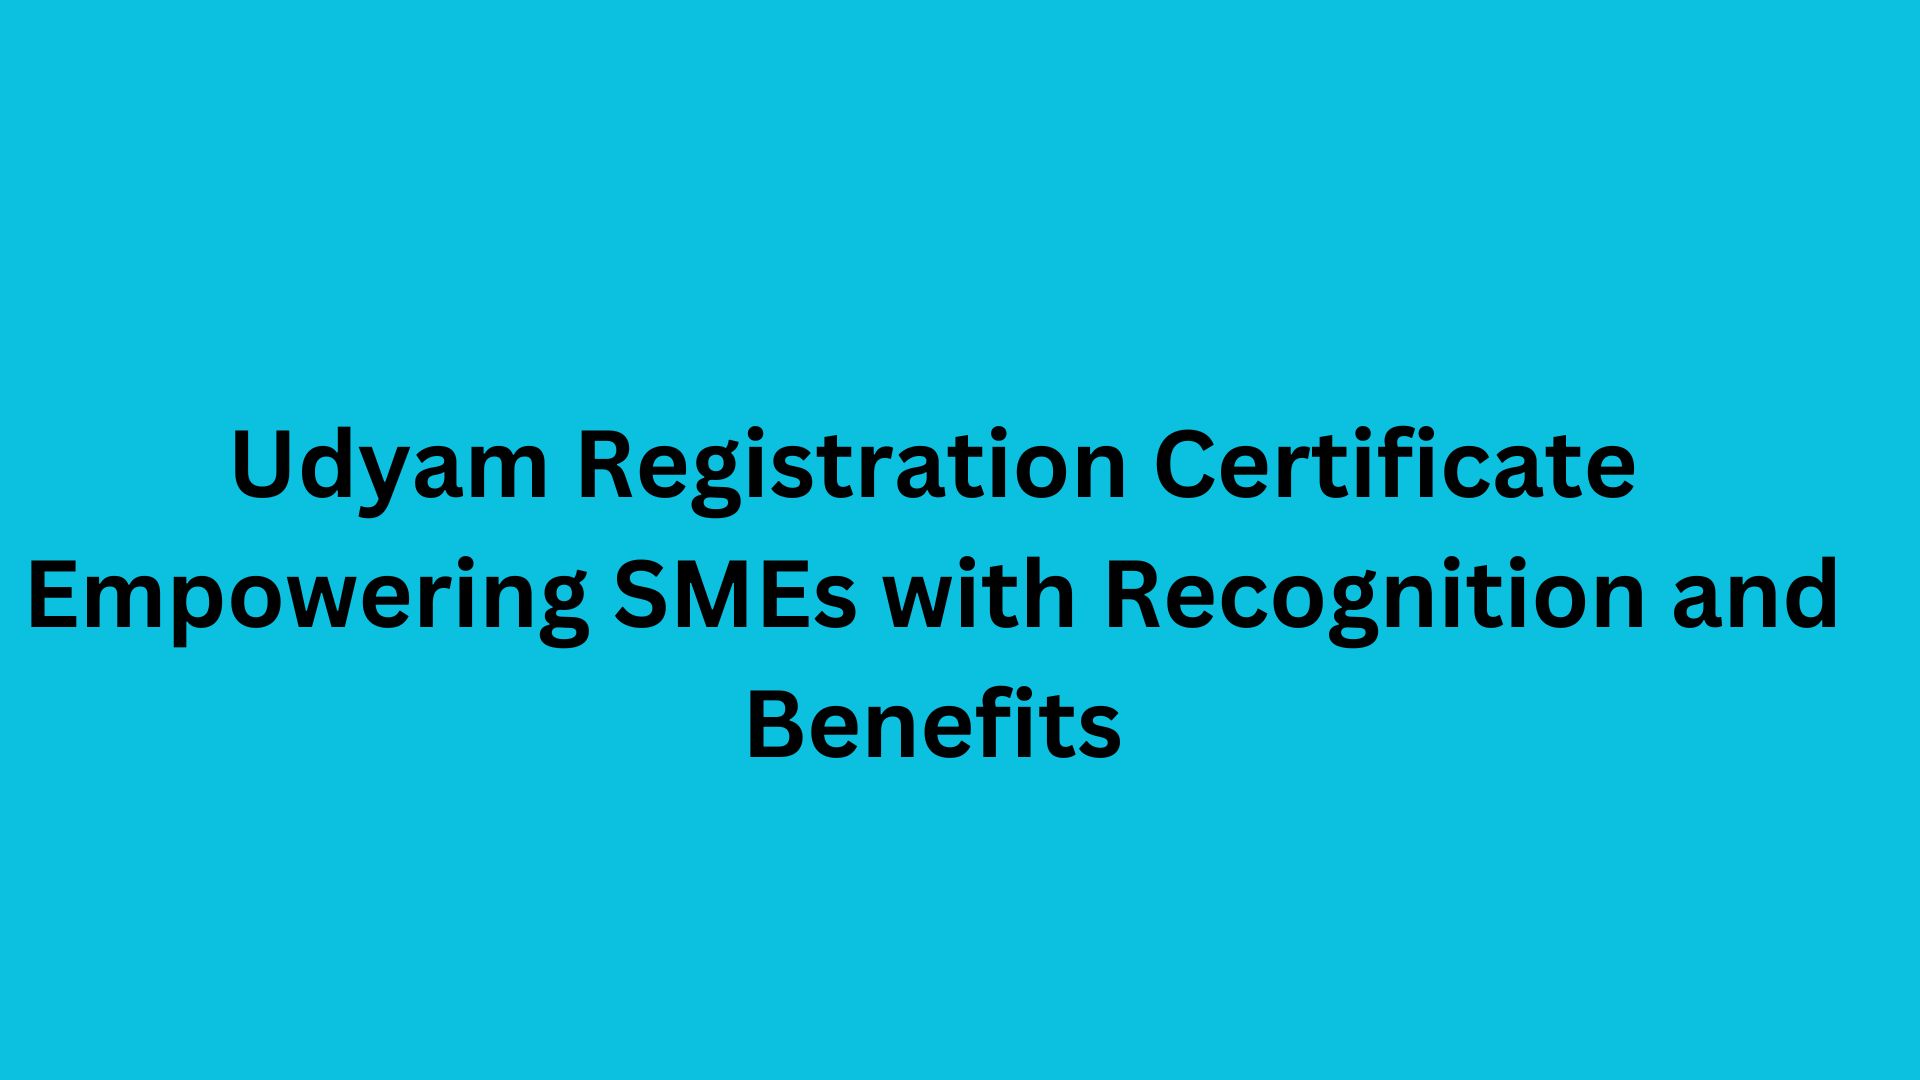 Udyam Registration Certificate Empowering SMEs with Recognition and Benefits